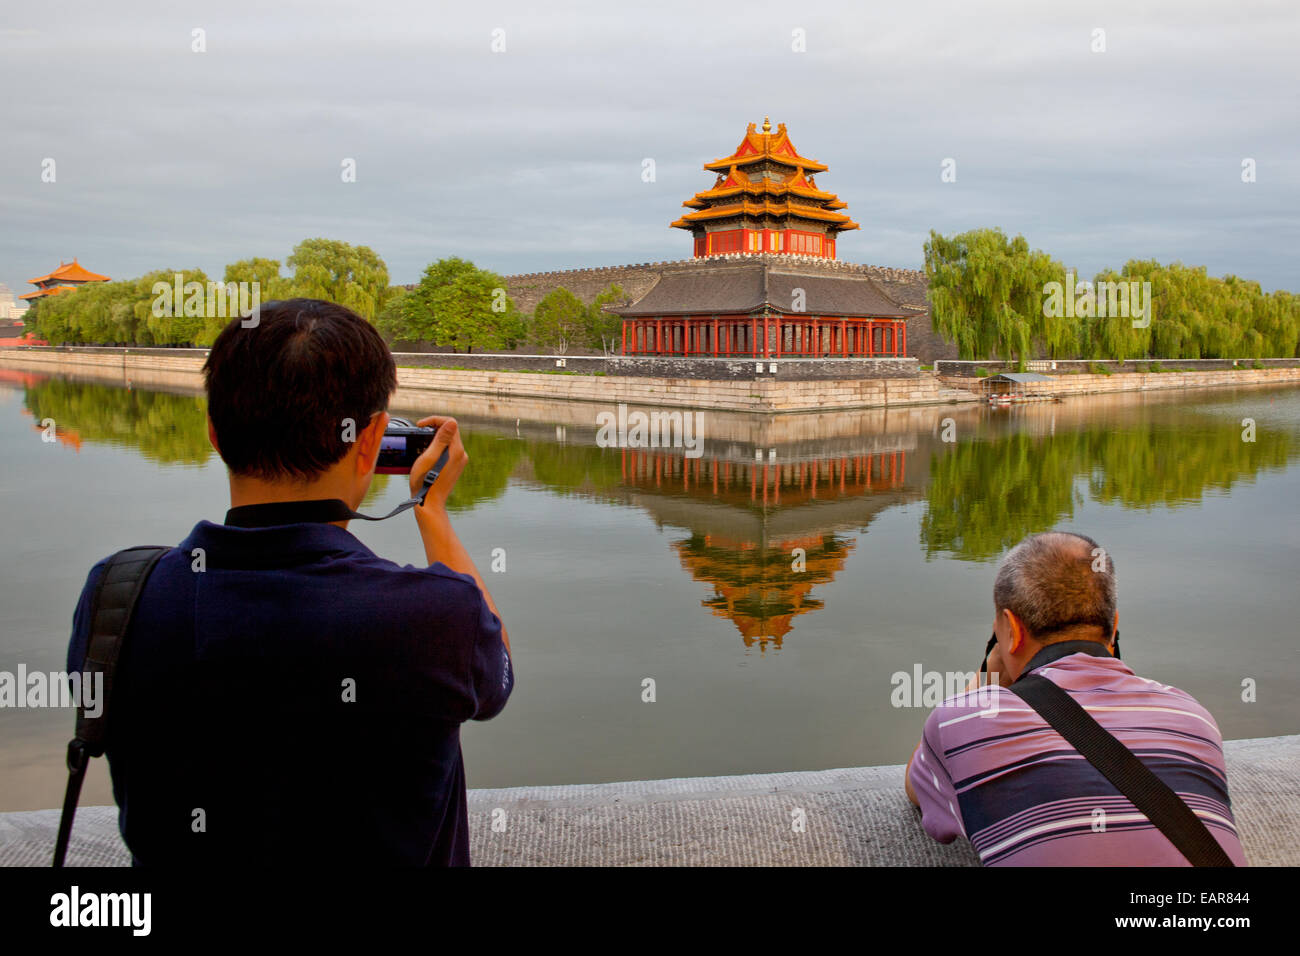 China, Forbidden City, tourism, vacation, pagoda, water, photographers, Buddhism, Capital Cities, Chinese Culture, reflection, Stock Photo